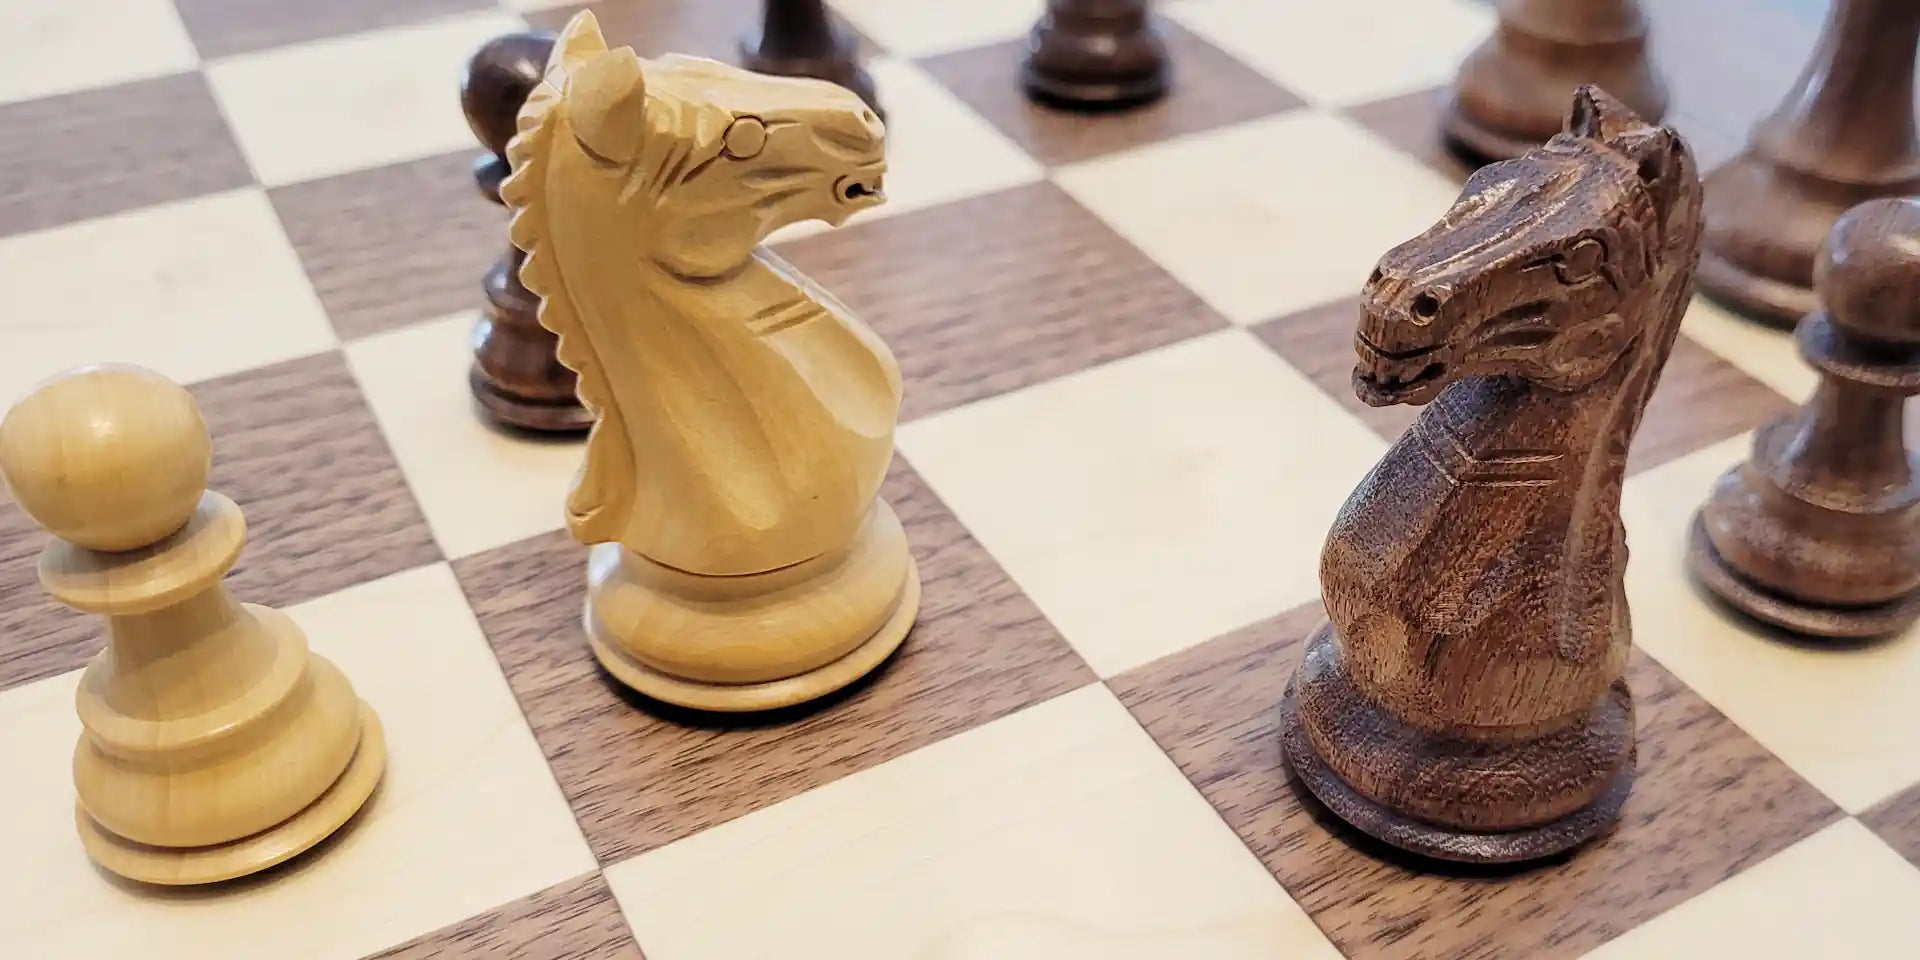 In the world of business, a chess piece symbolizes strategic